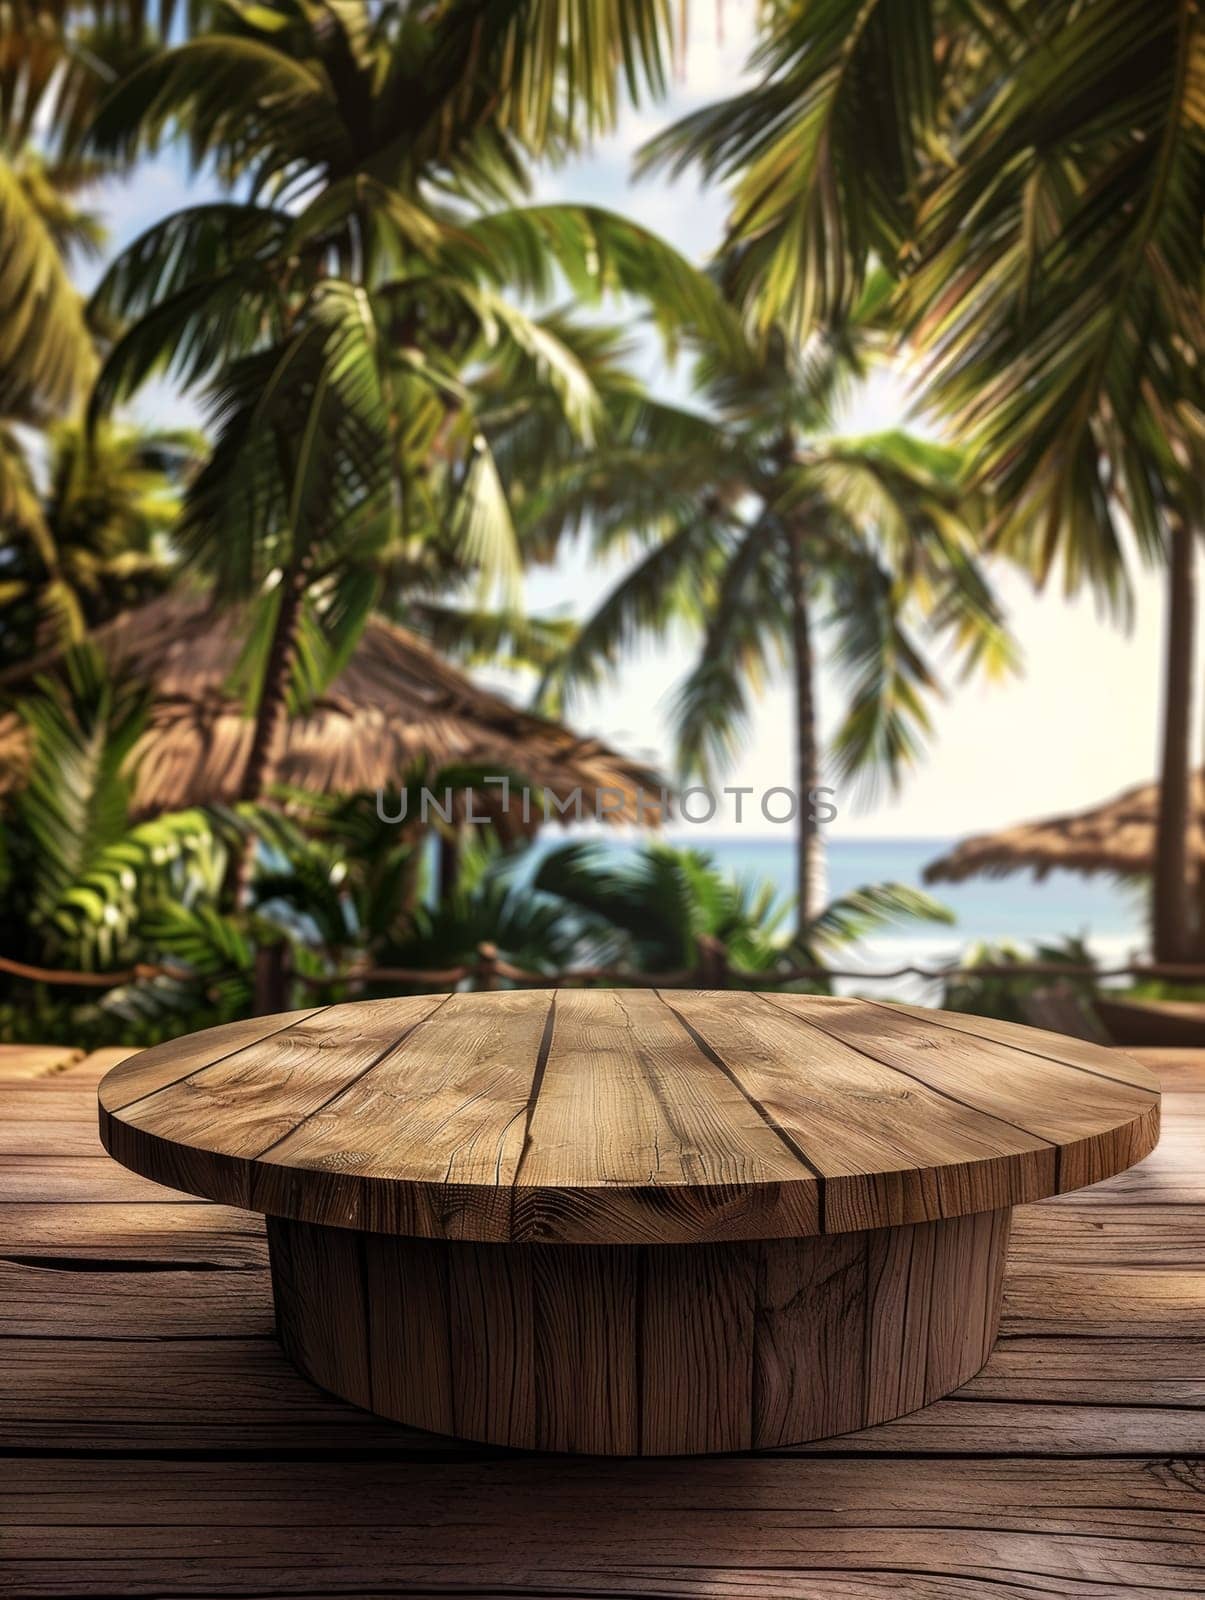 A rustic wooden podium sits on a wooden deck, surrounded by a lush tropical landscape of swaying palm trees and vibrant foliage, with a stunning ocean view in the distance